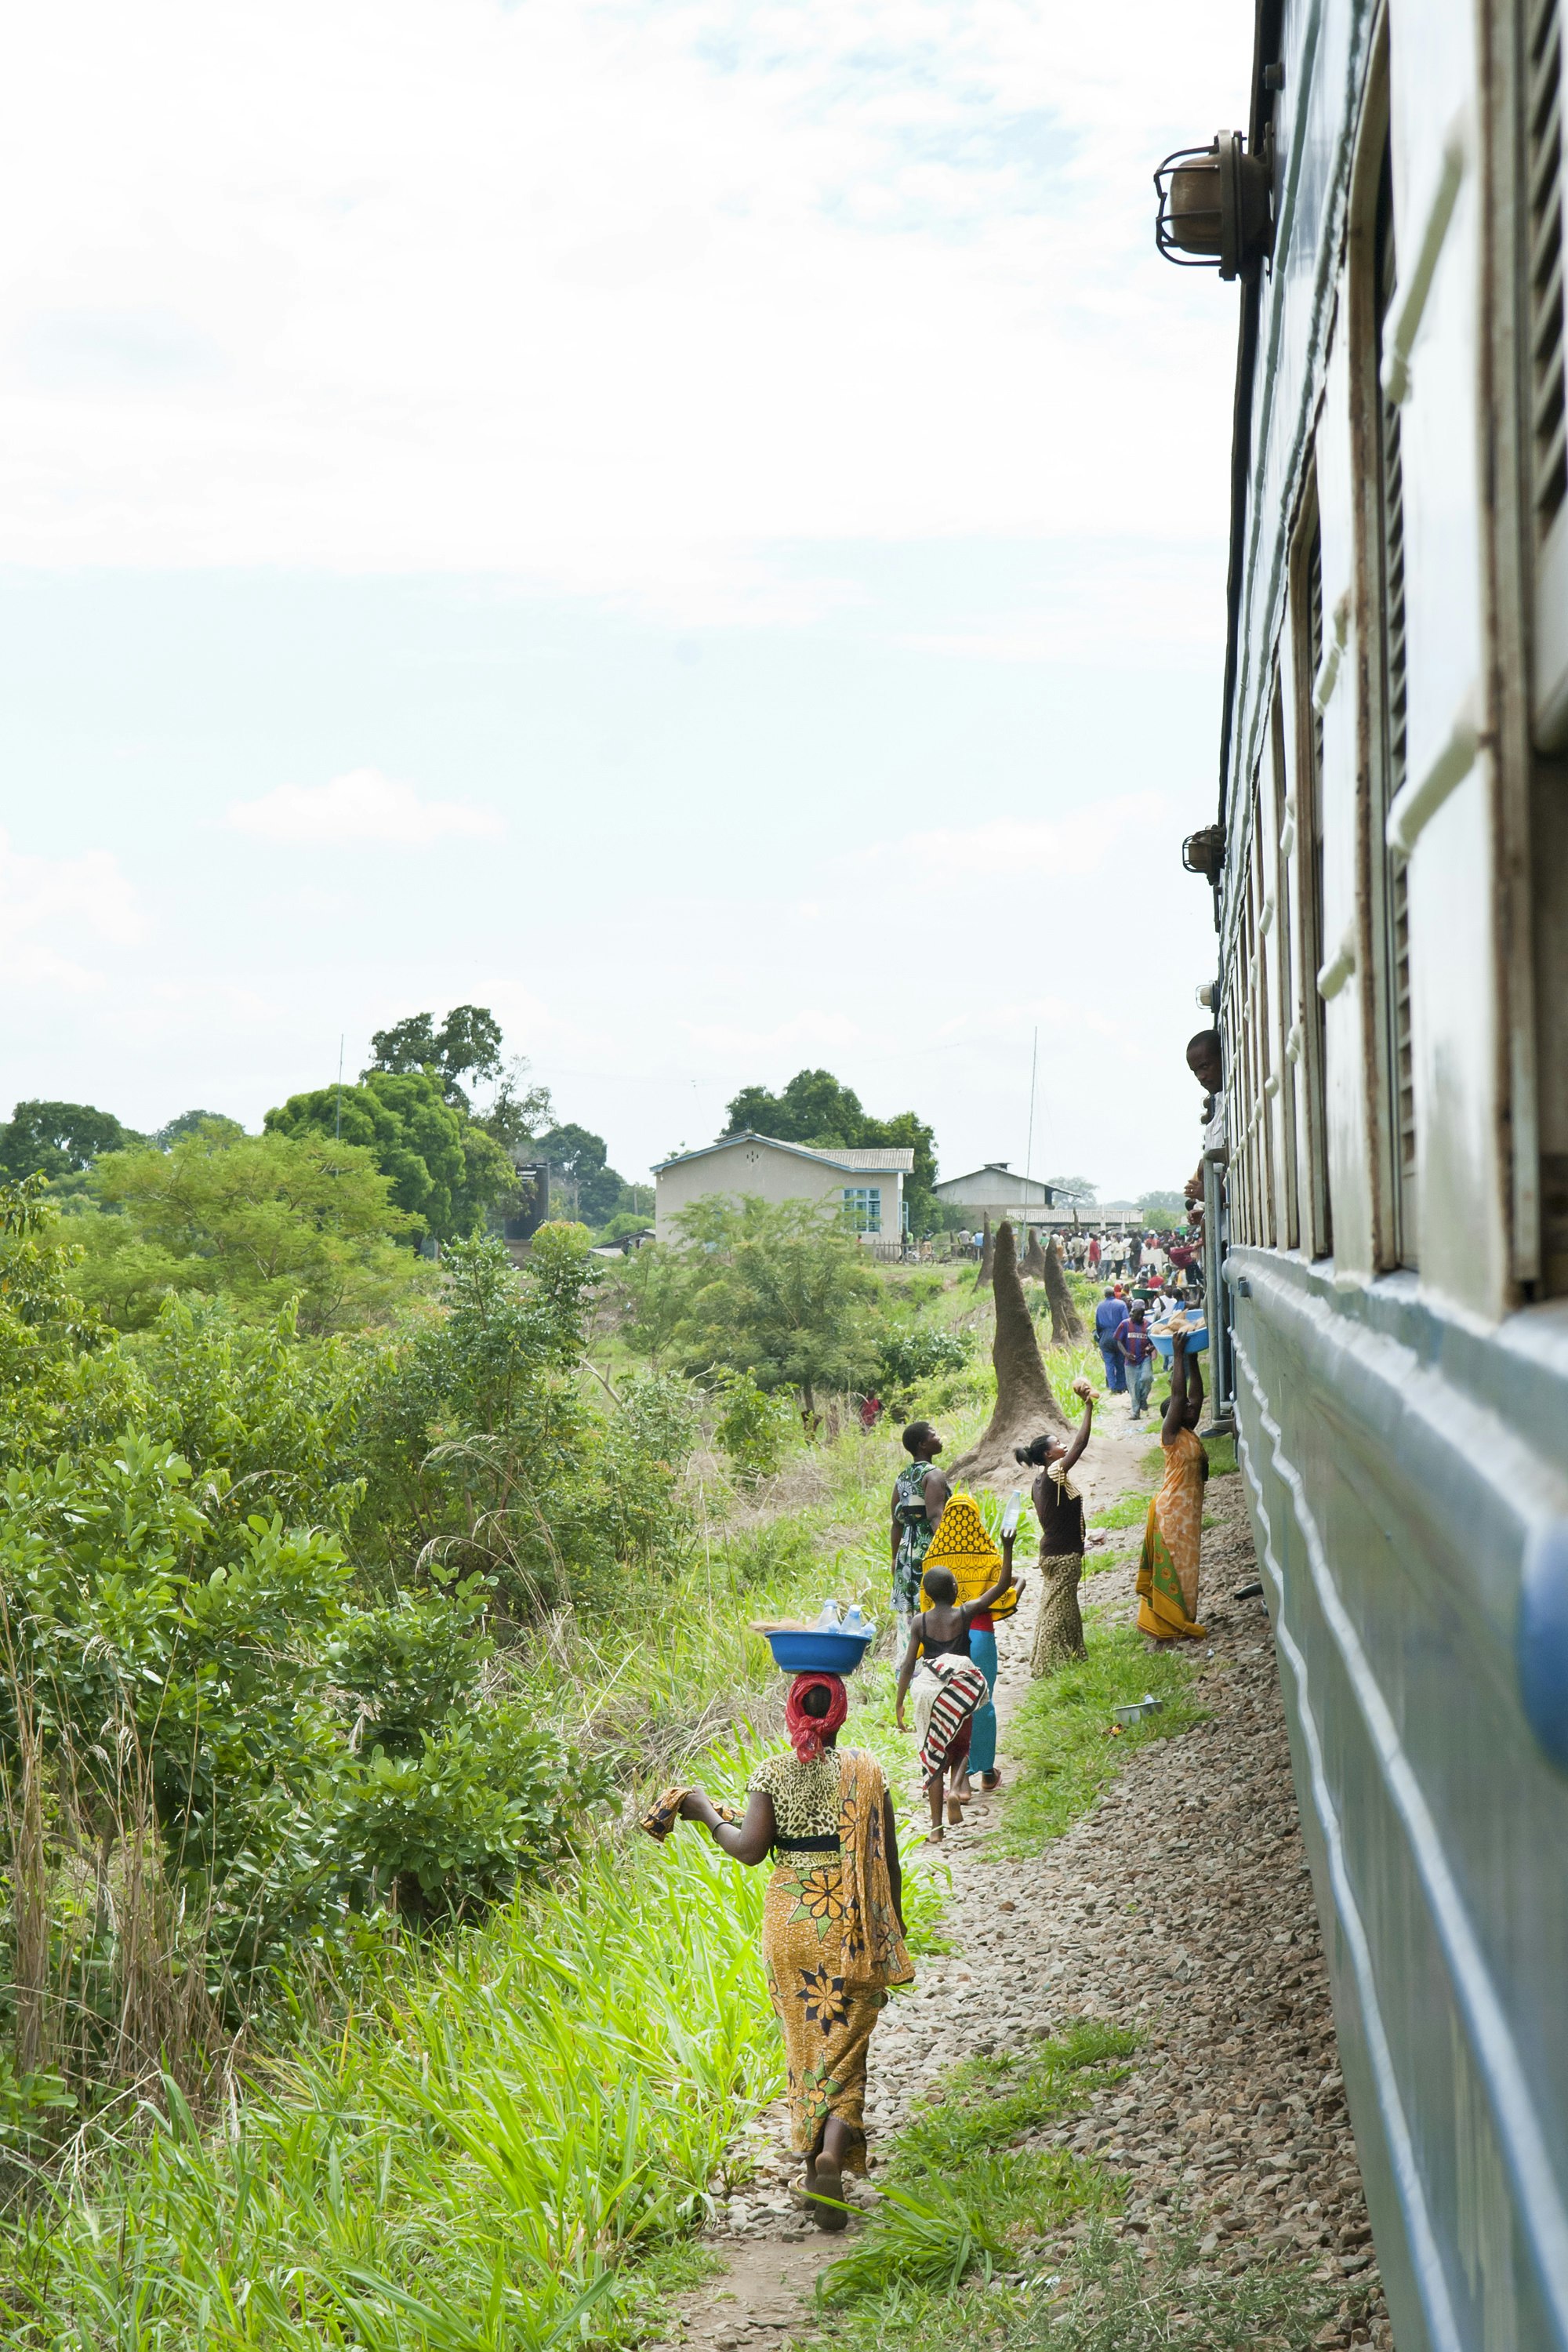 Women walk along the gravel verge beside a stopped train; they carry bowls on their heads and sell drinks and food through the windows of the train.